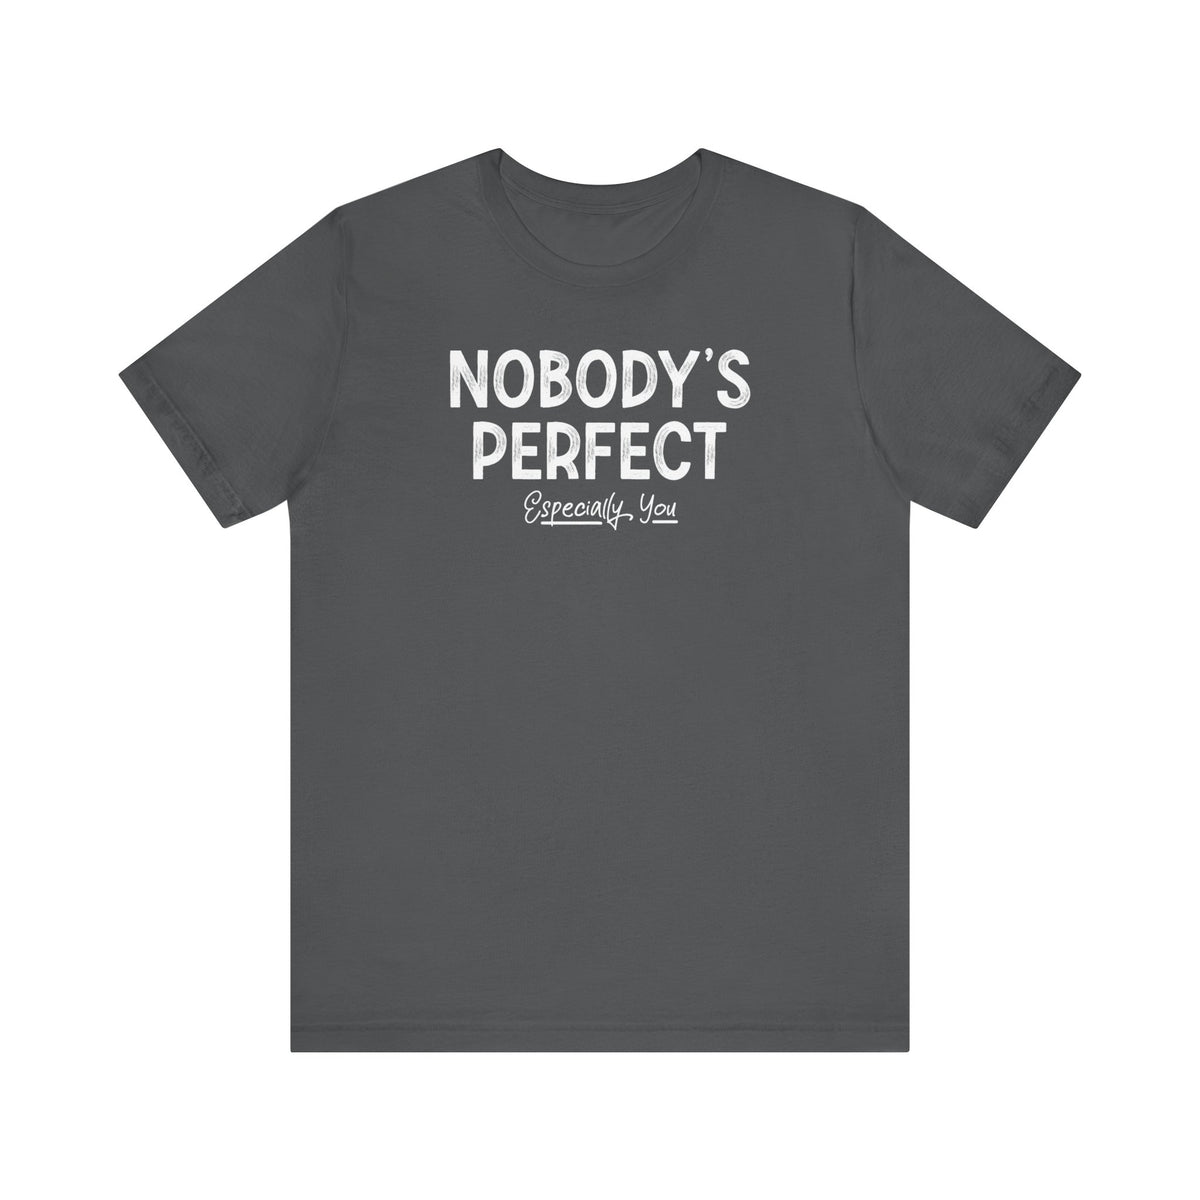 Nobody's Perfect. Especially You. - Men's T-Shirt